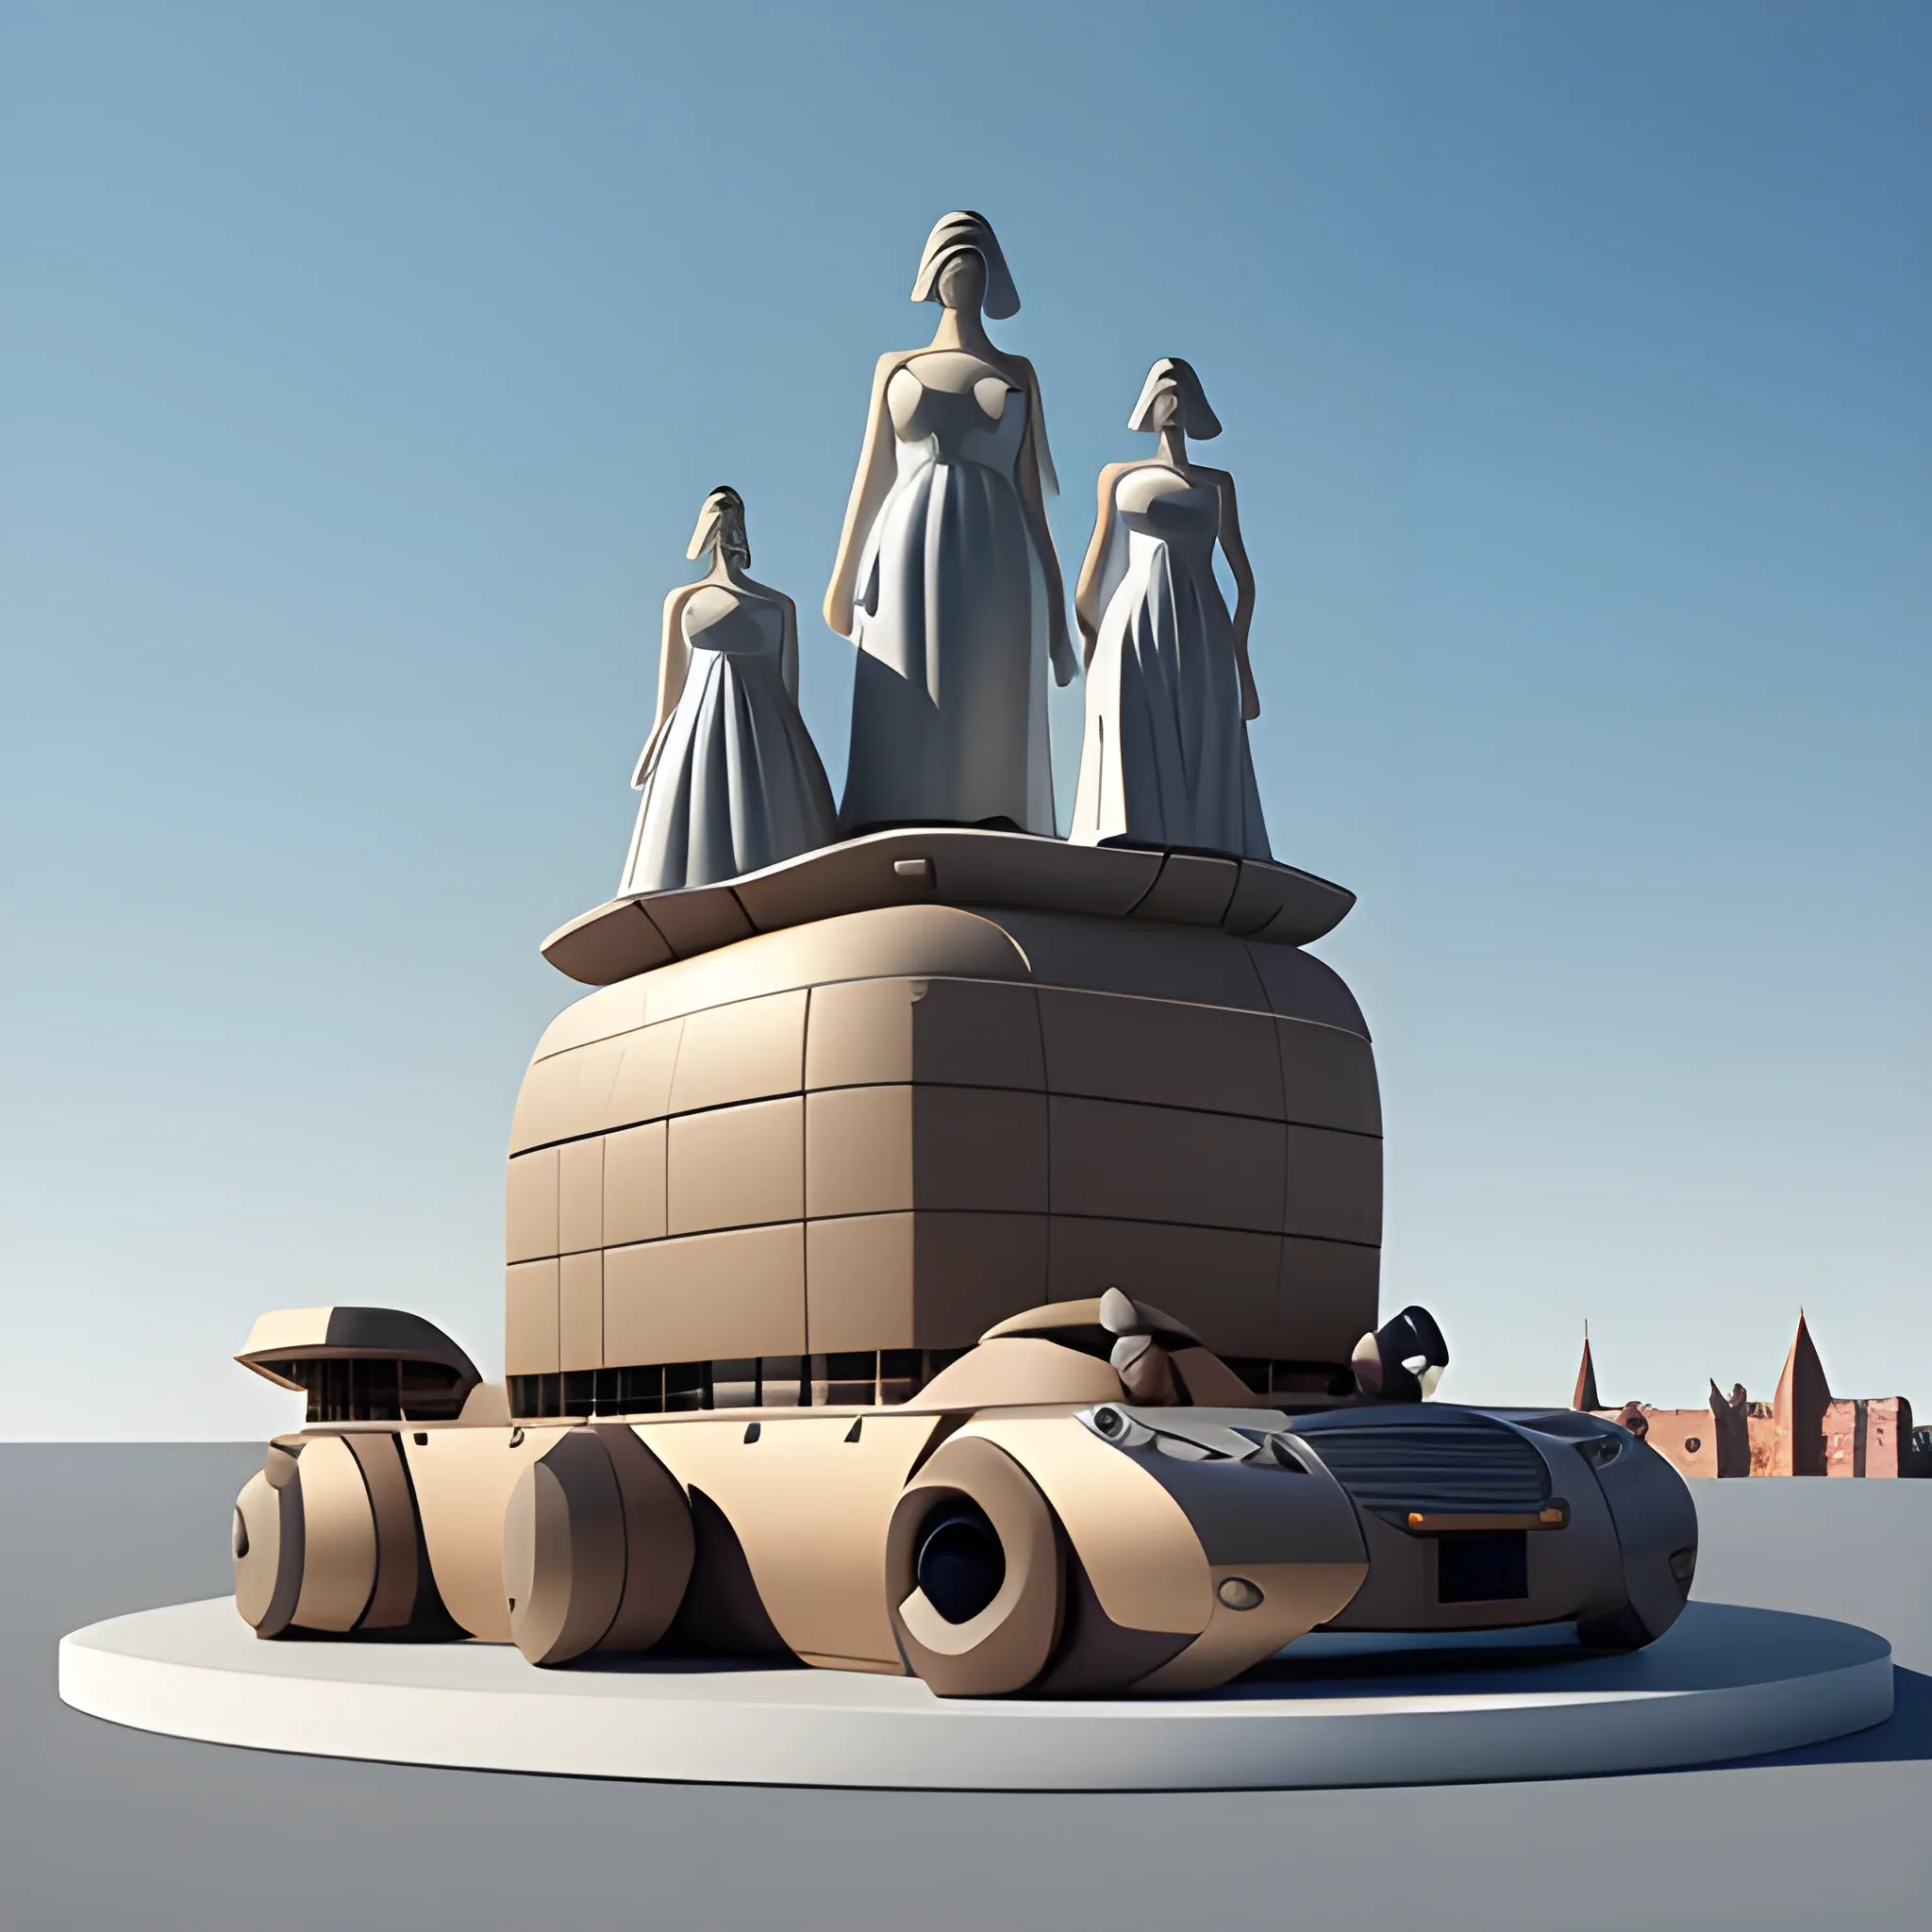 Create a monumental modern sculptured italian big dinner folk   in Claes Olderburg style, simple design as Bahaus style, minimal, geometric simplicity, feature with gown, toga concept ,Bronce material surface and brick base, asymetric composition,   big locomotion expression,  blue sky background, pretty detailed HD render, classic base, fountain, 3D, 3D, 3D